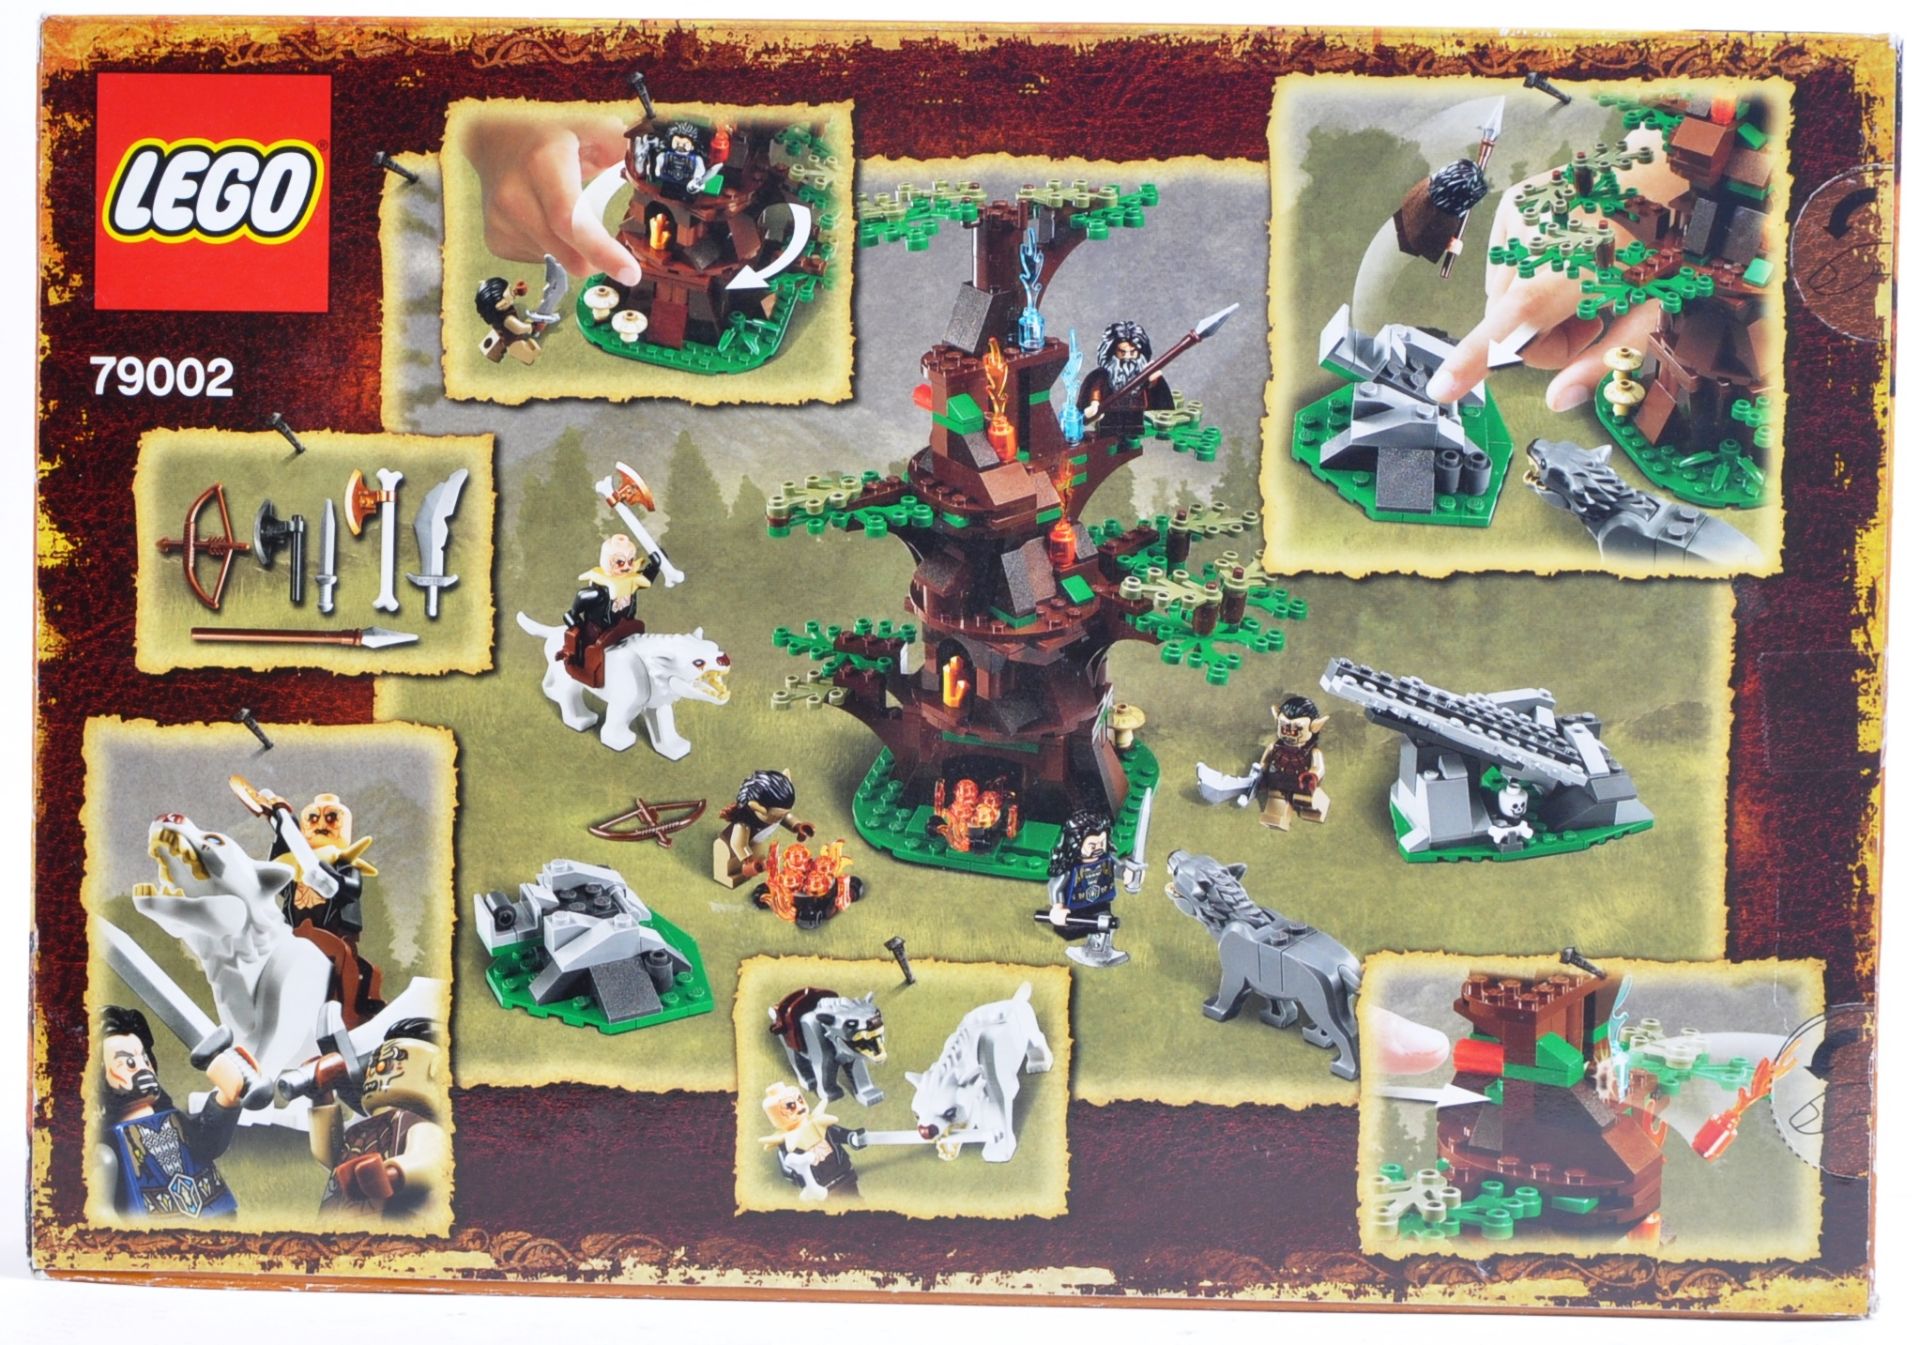 LEGO SET - THE HOBBIT - 79002 - ATTACK OF THE WARGS - Image 2 of 4